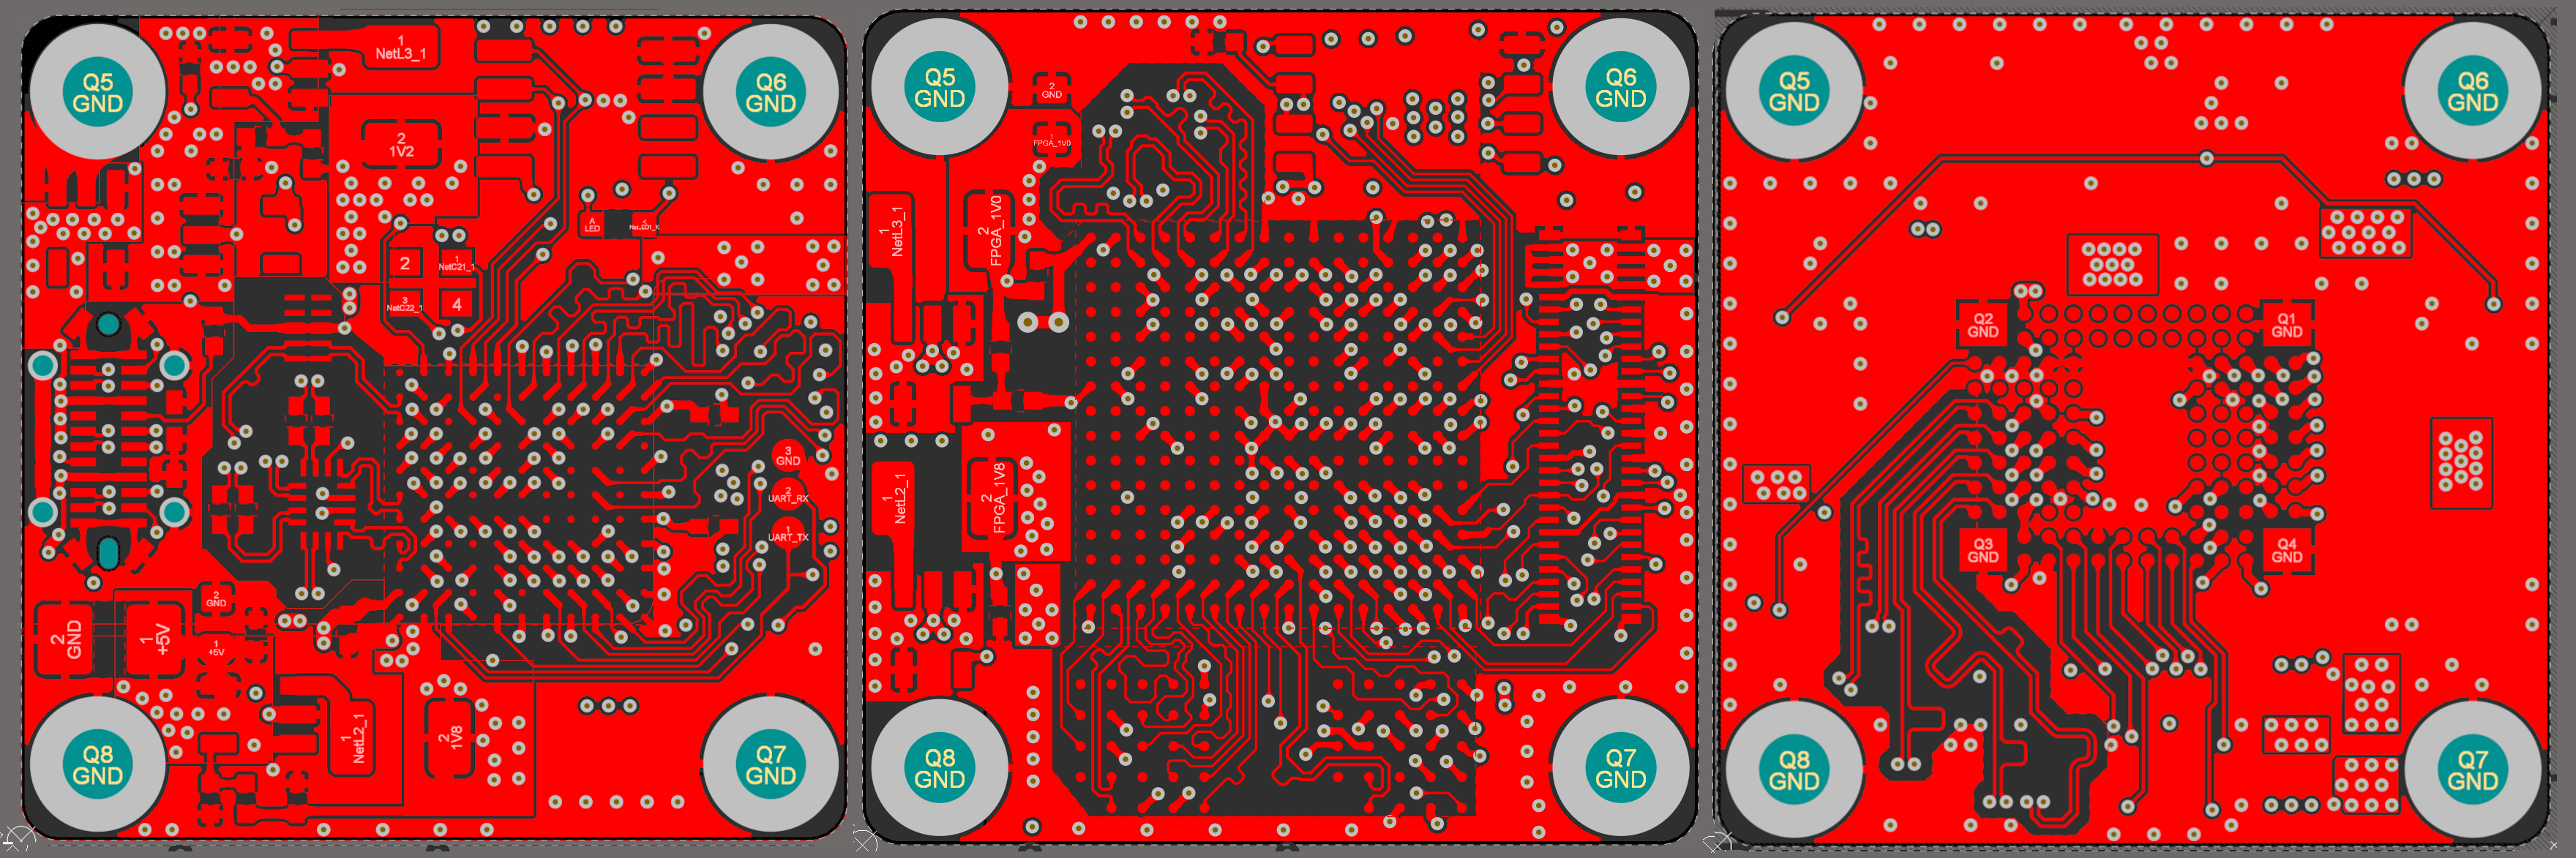 PCB HS Code Complete Guide - Fx PCB